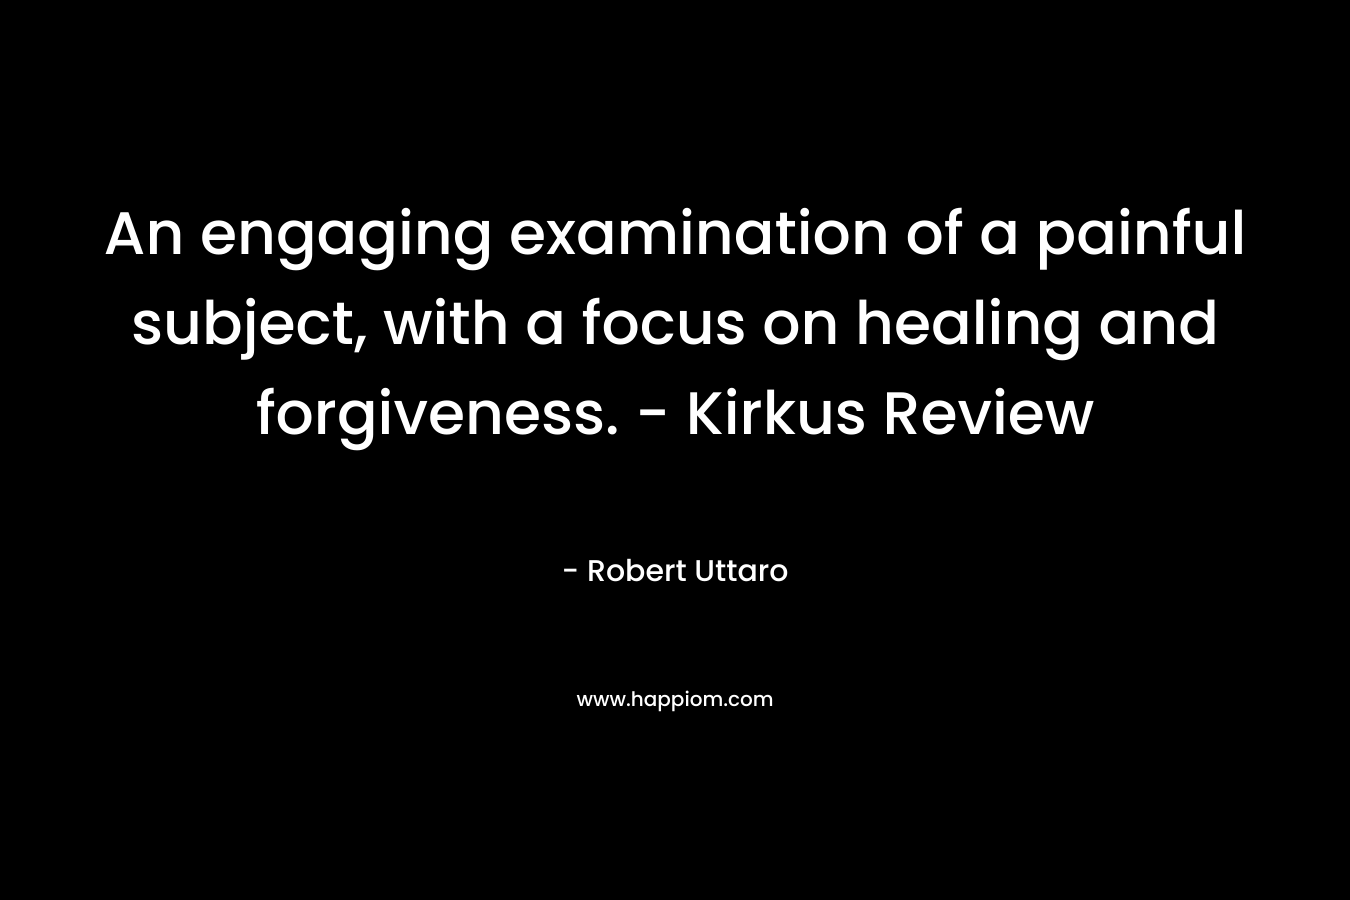 An engaging examination of a painful subject, with a focus on healing and forgiveness. - Kirkus Review